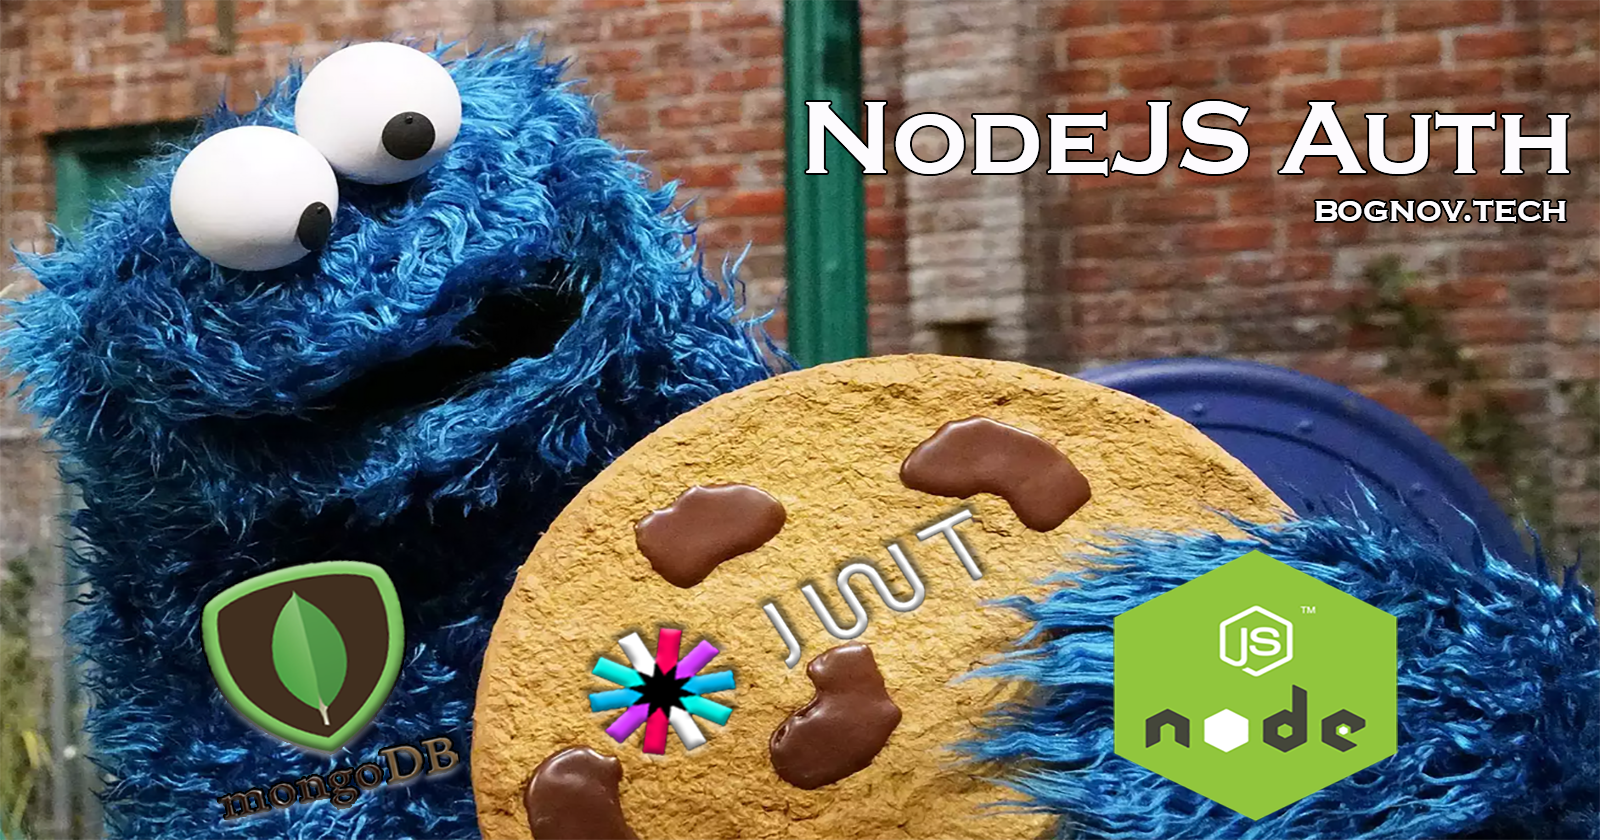 NodeJS auth: JWT, cookies, express, mongoose and more!